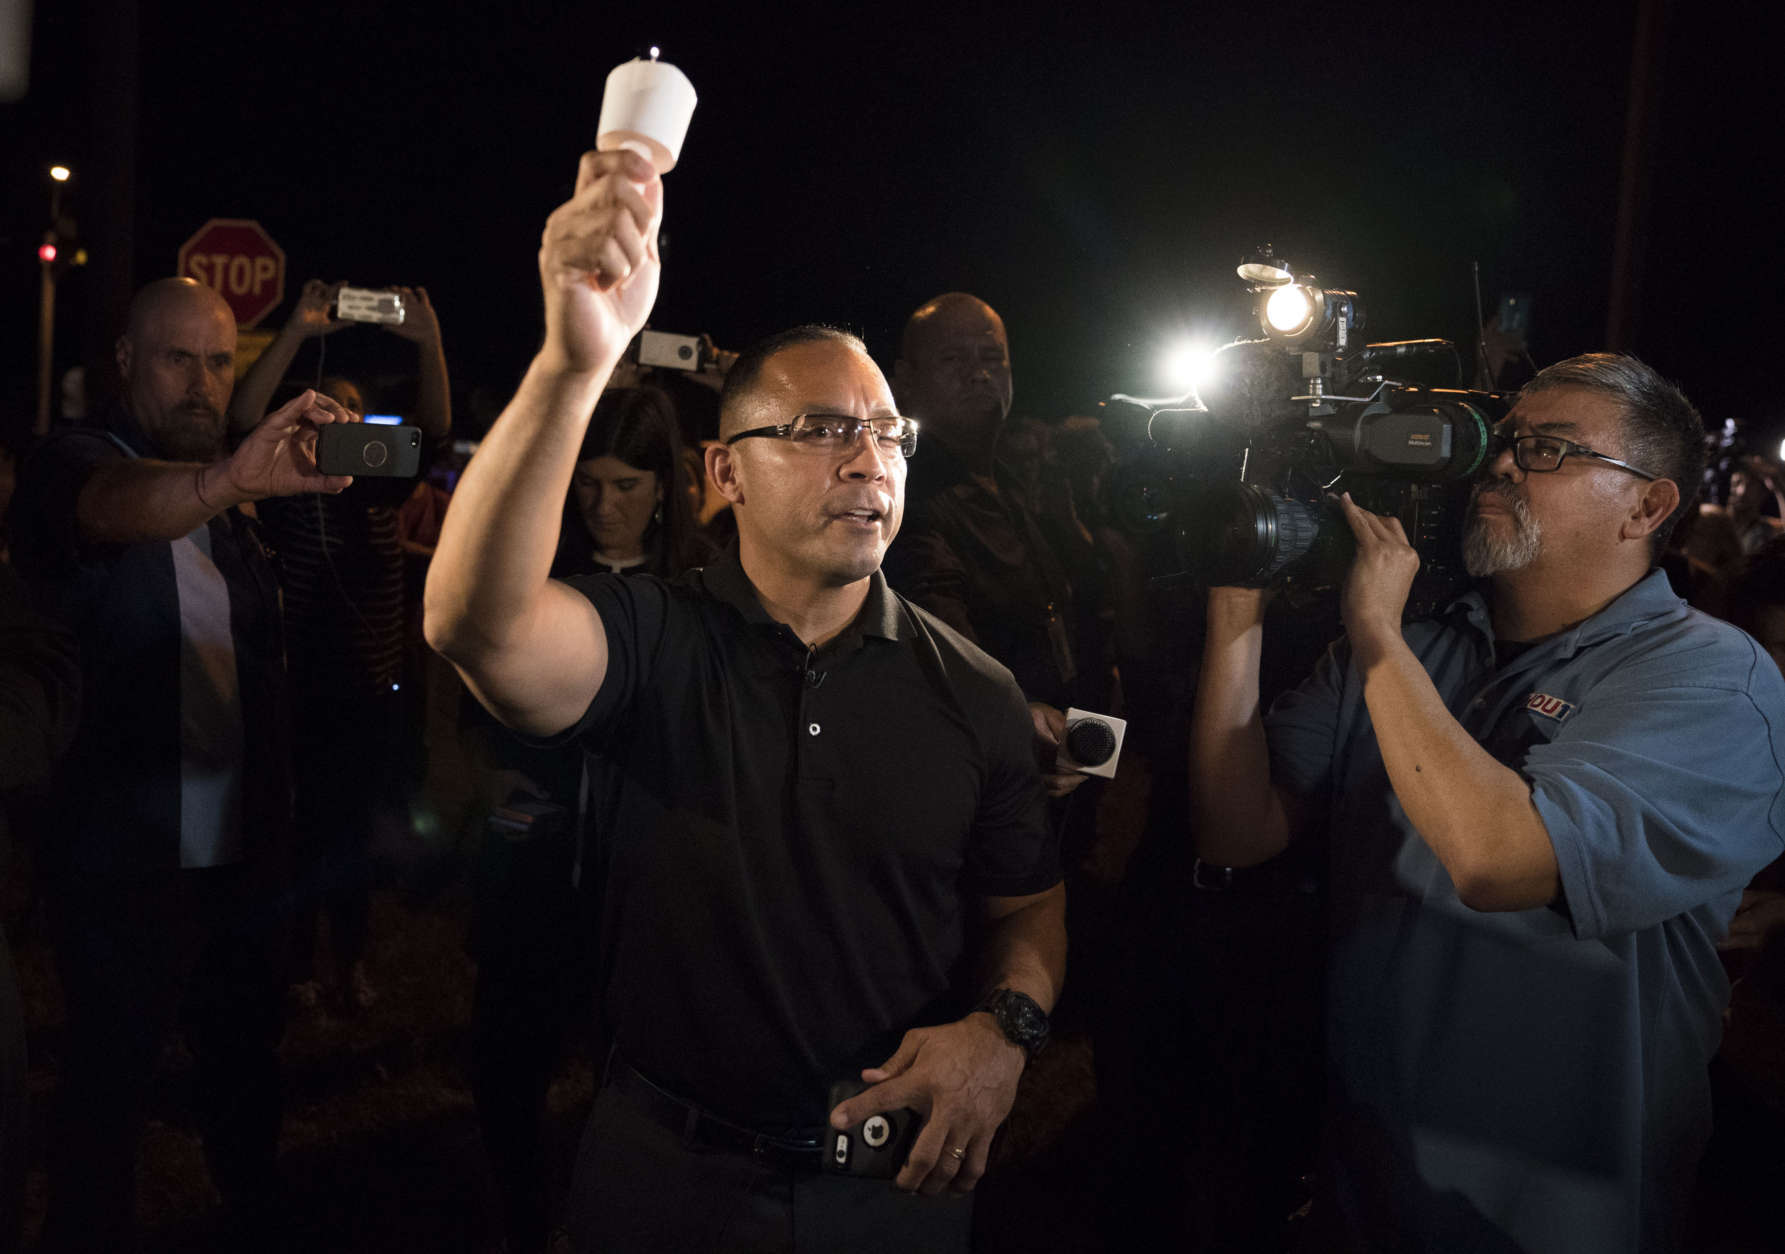 Community leader Mike Gonzales leads a candlelight vigil for the victims of a fatal shooting at the First Baptist Church of Sutherland Springs, Sunday, Nov. 5, 2017, in Sutherland Springs, Texas. (AP Photo/Darren Abate)